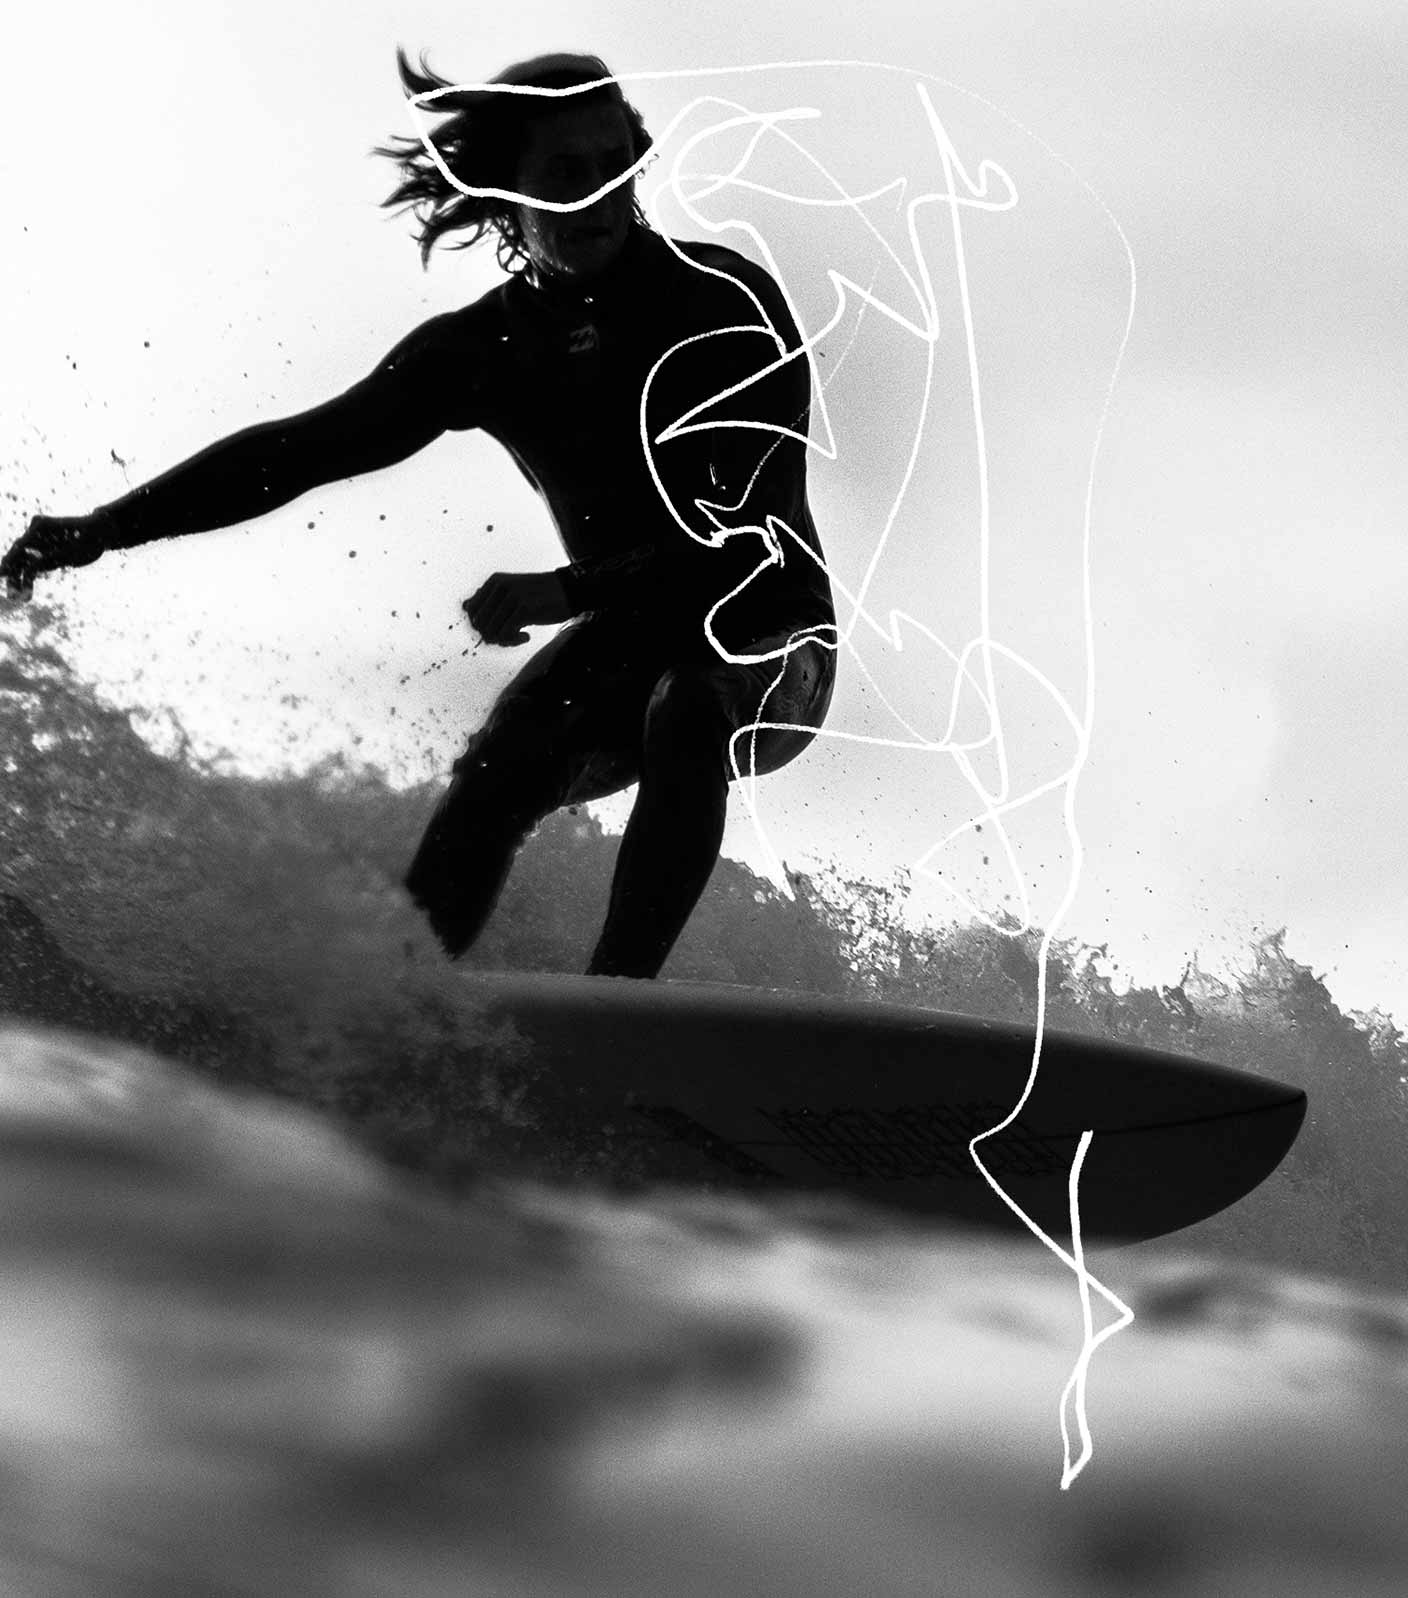 A black-and-white photo of a surfer with long hair doing a fast smooth turn on a small wave, shot from close above the ocean surface with white scribble lines drawn over it imitating the movement.